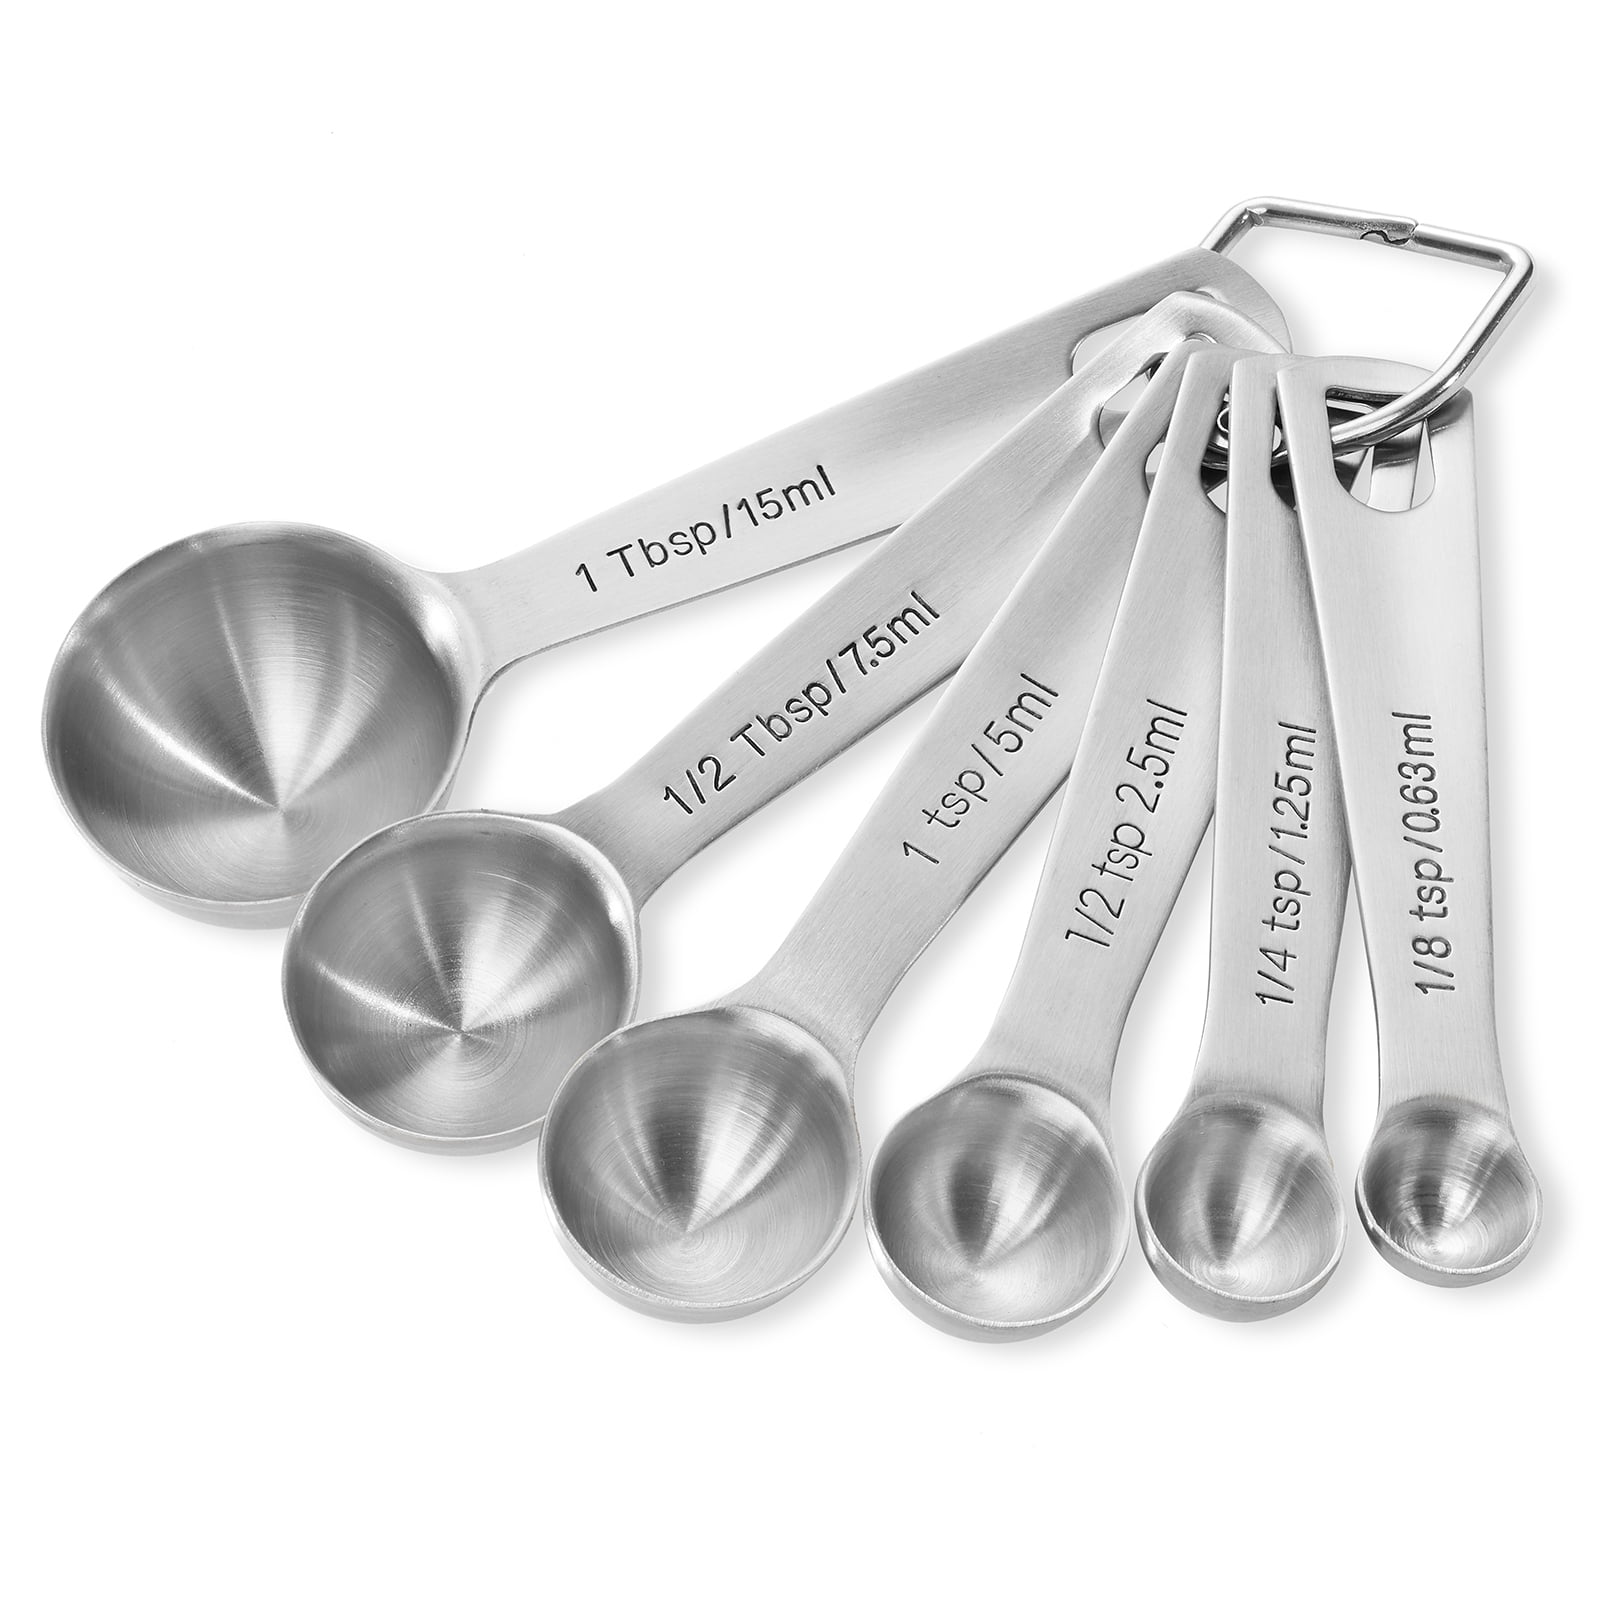 Last Confection 6pc Stainless Steel Measuring Spoon Set Teaspoon And Tablespoon Measurements For Dry Spices And Liquid Cooking Baking Ingredients